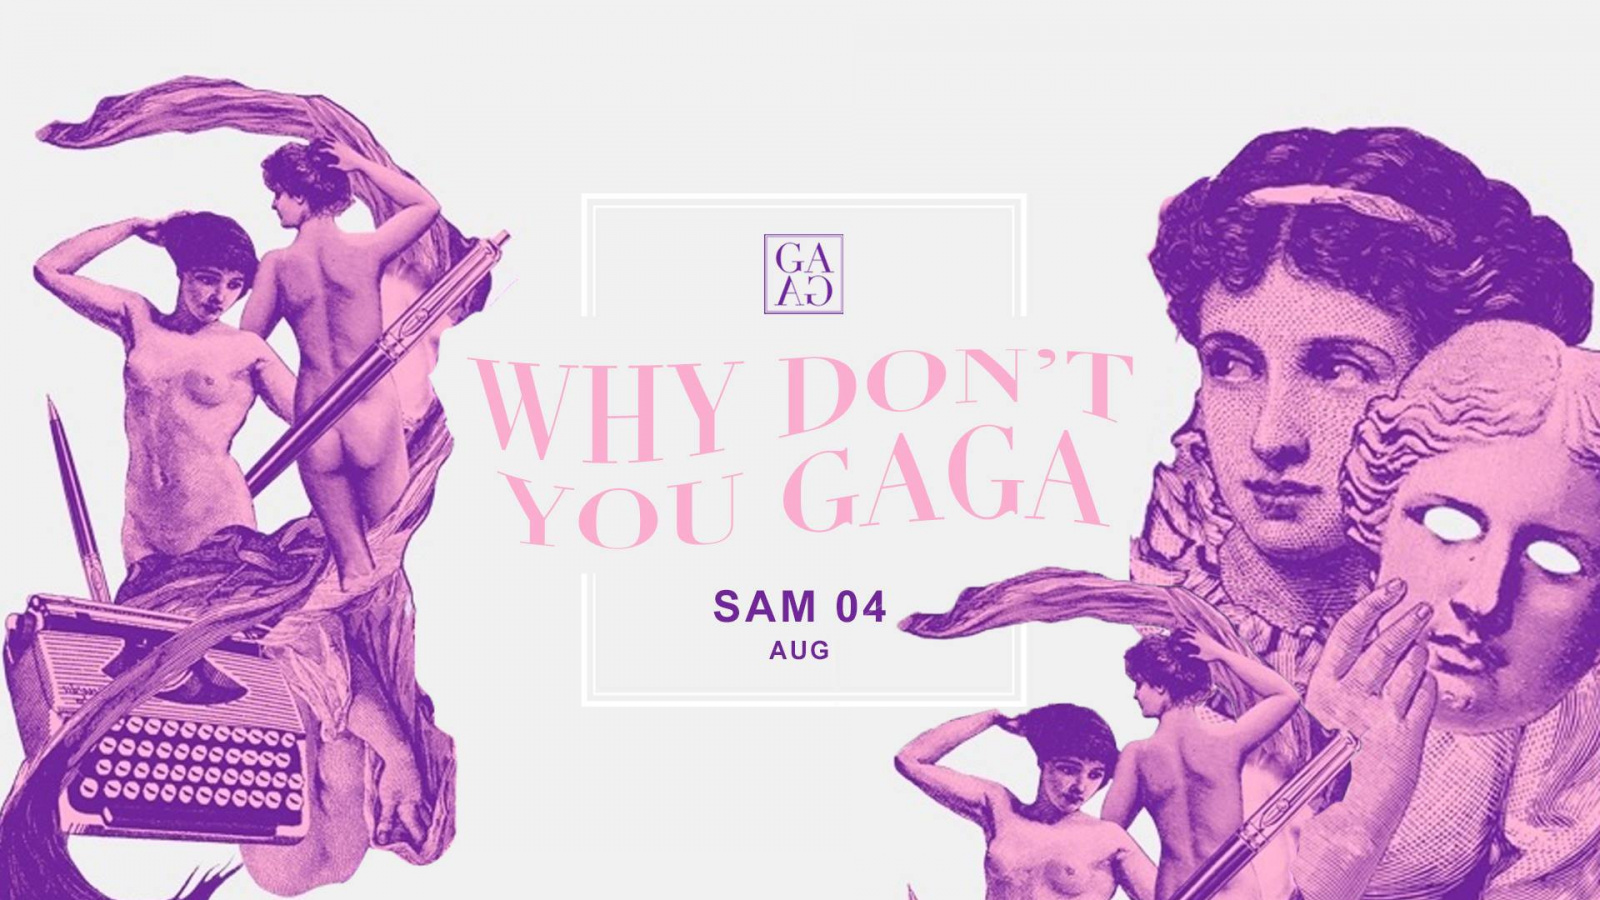 Why don't you GAGA